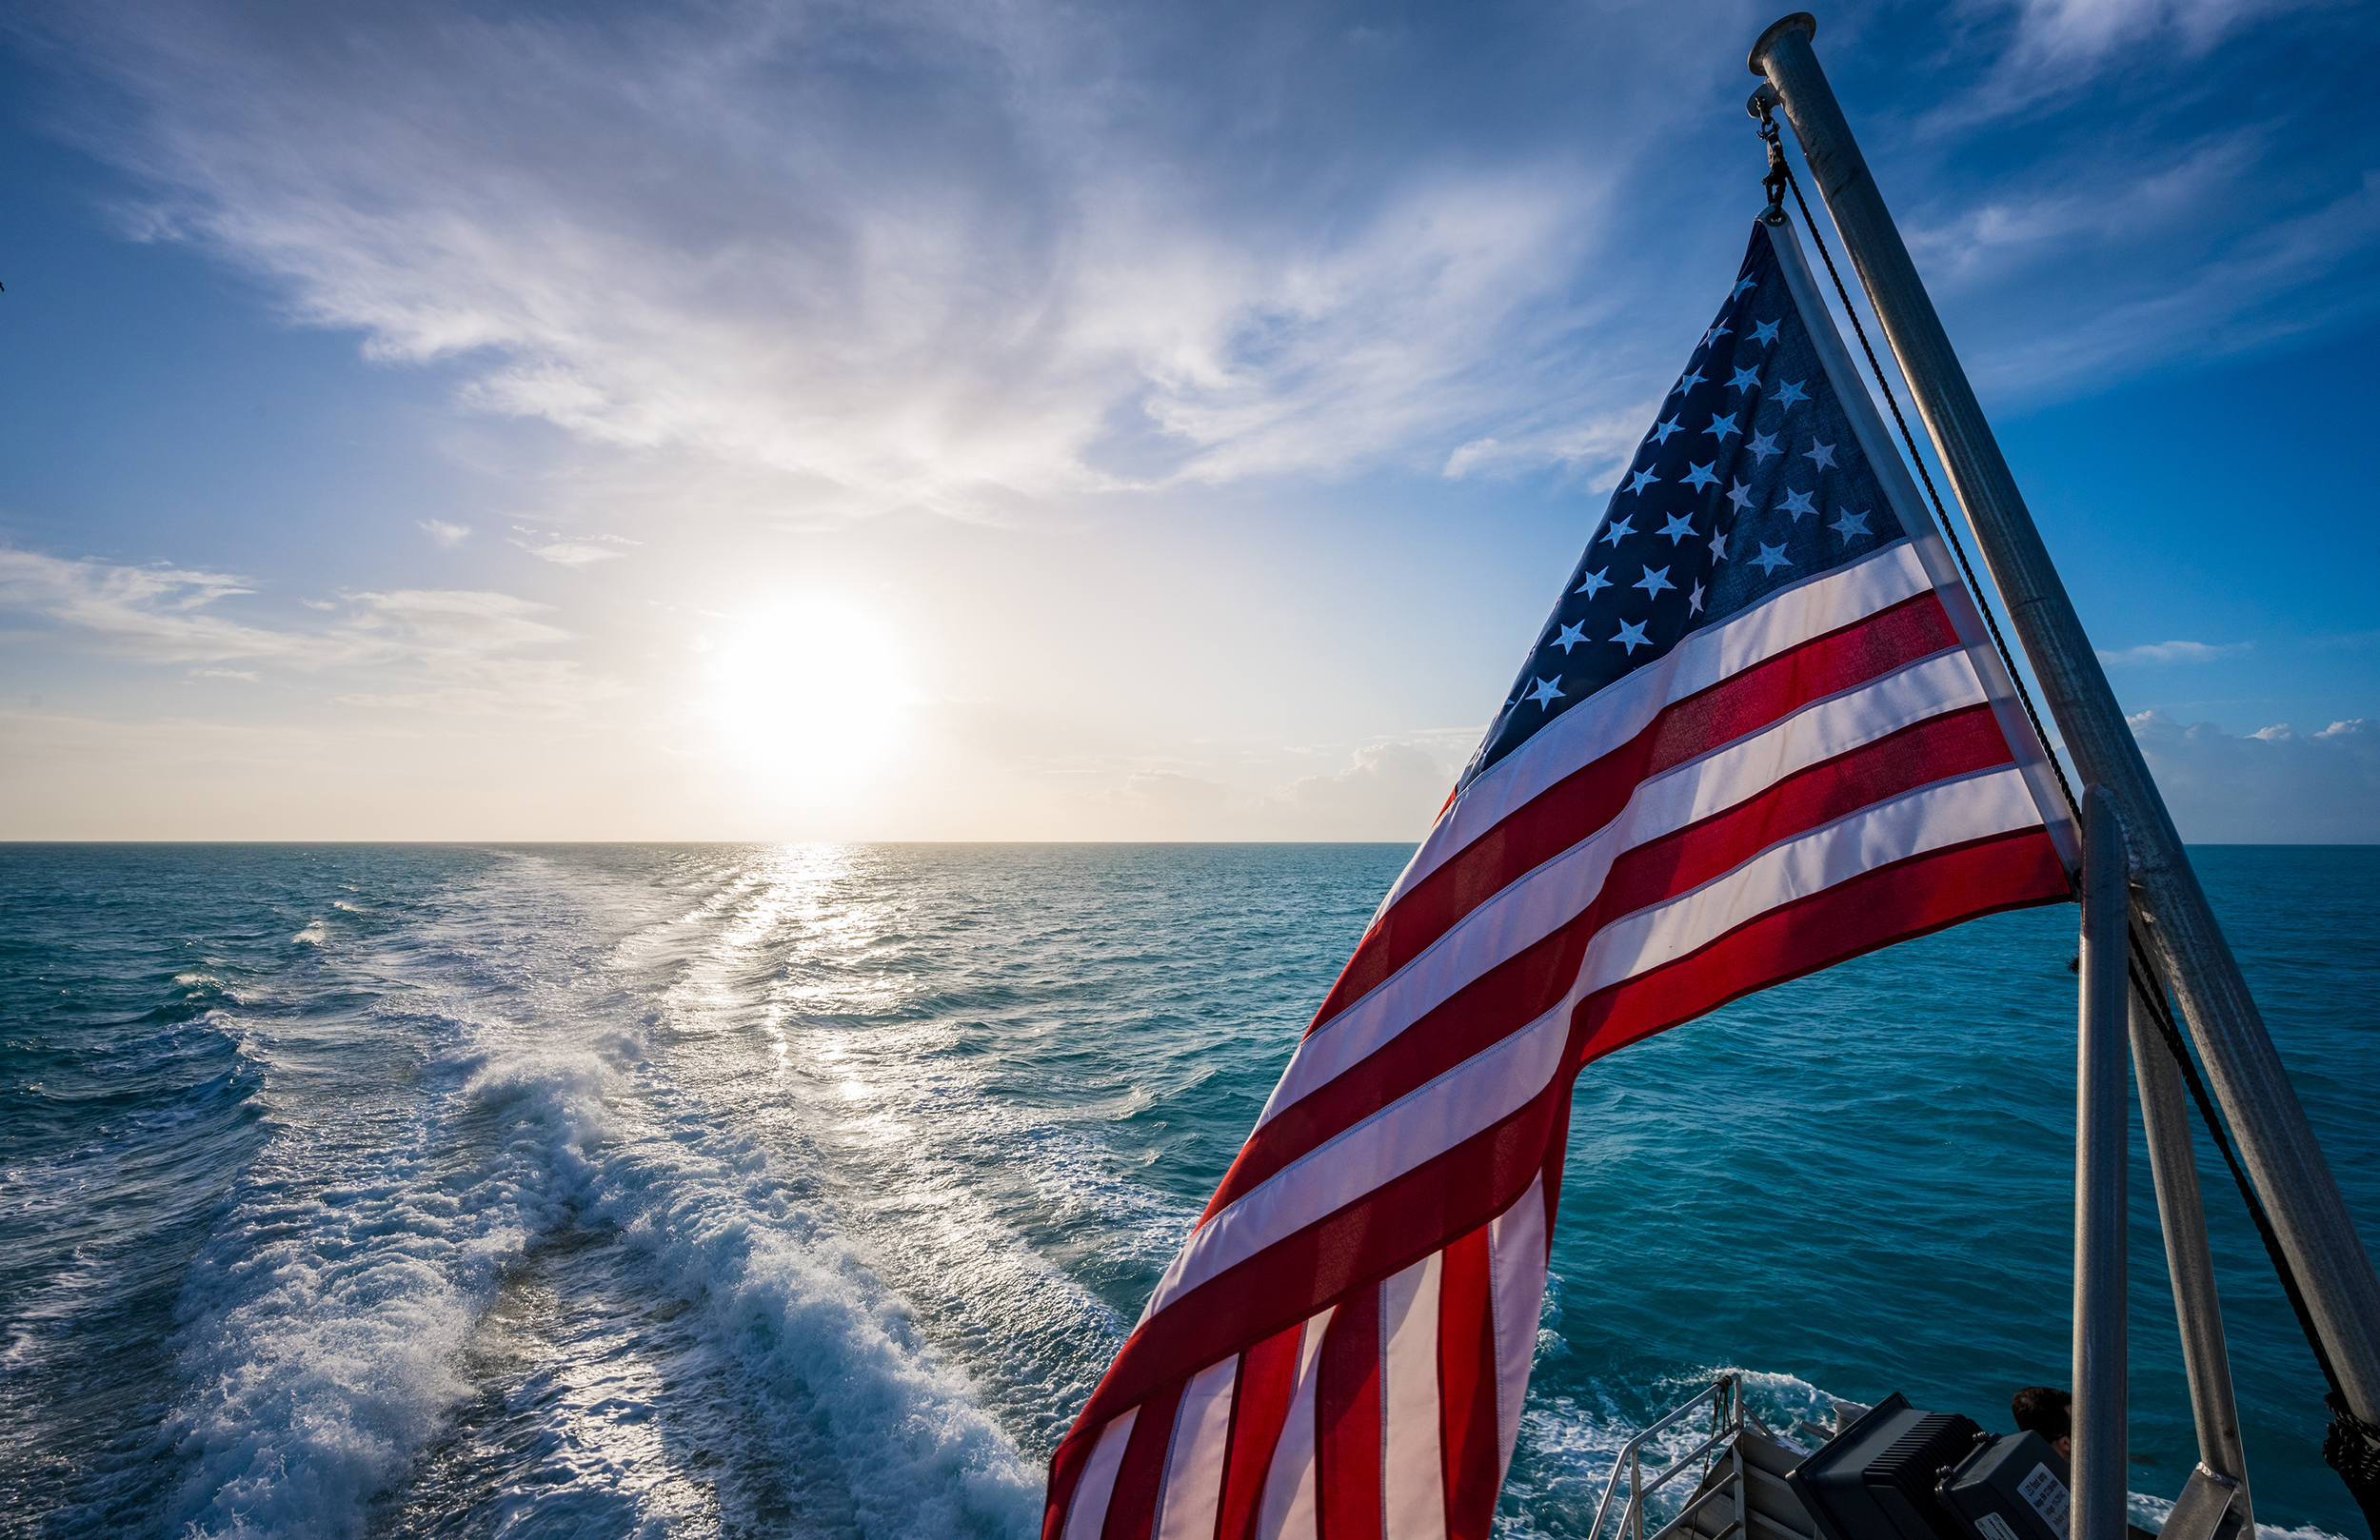 American Flag and Sunrise Over Gulf of Mexico on calm morning